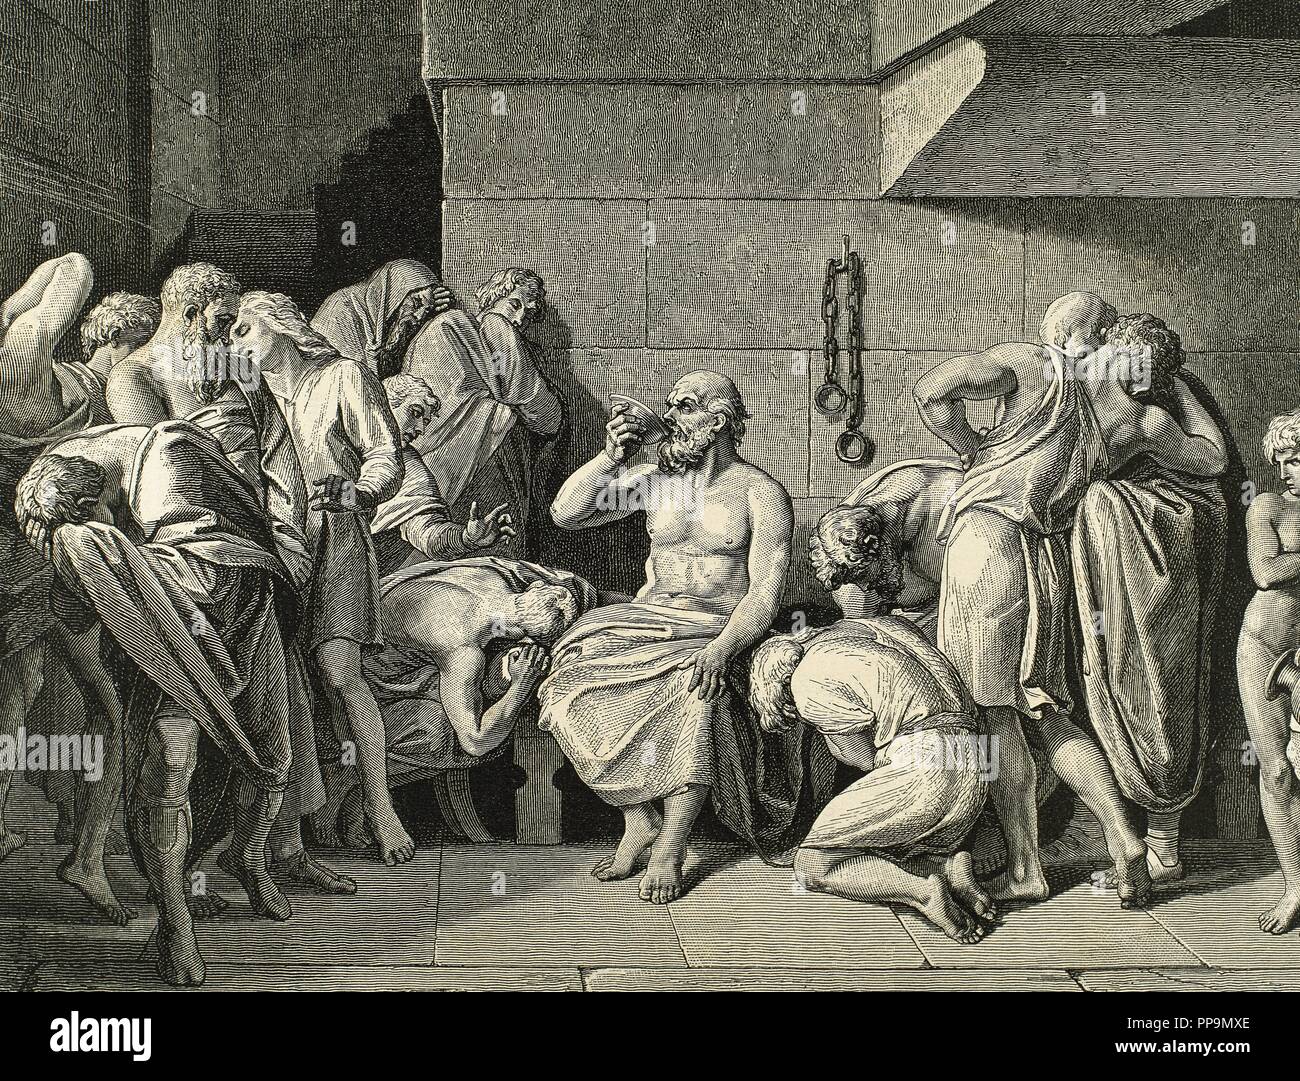 Socrates (c.469-399 BC). Classical Greek philosopher. The Death of Socrates. He was sentenced to die by drinking poison hemlock. Engraving. 19th century. Stock Photo